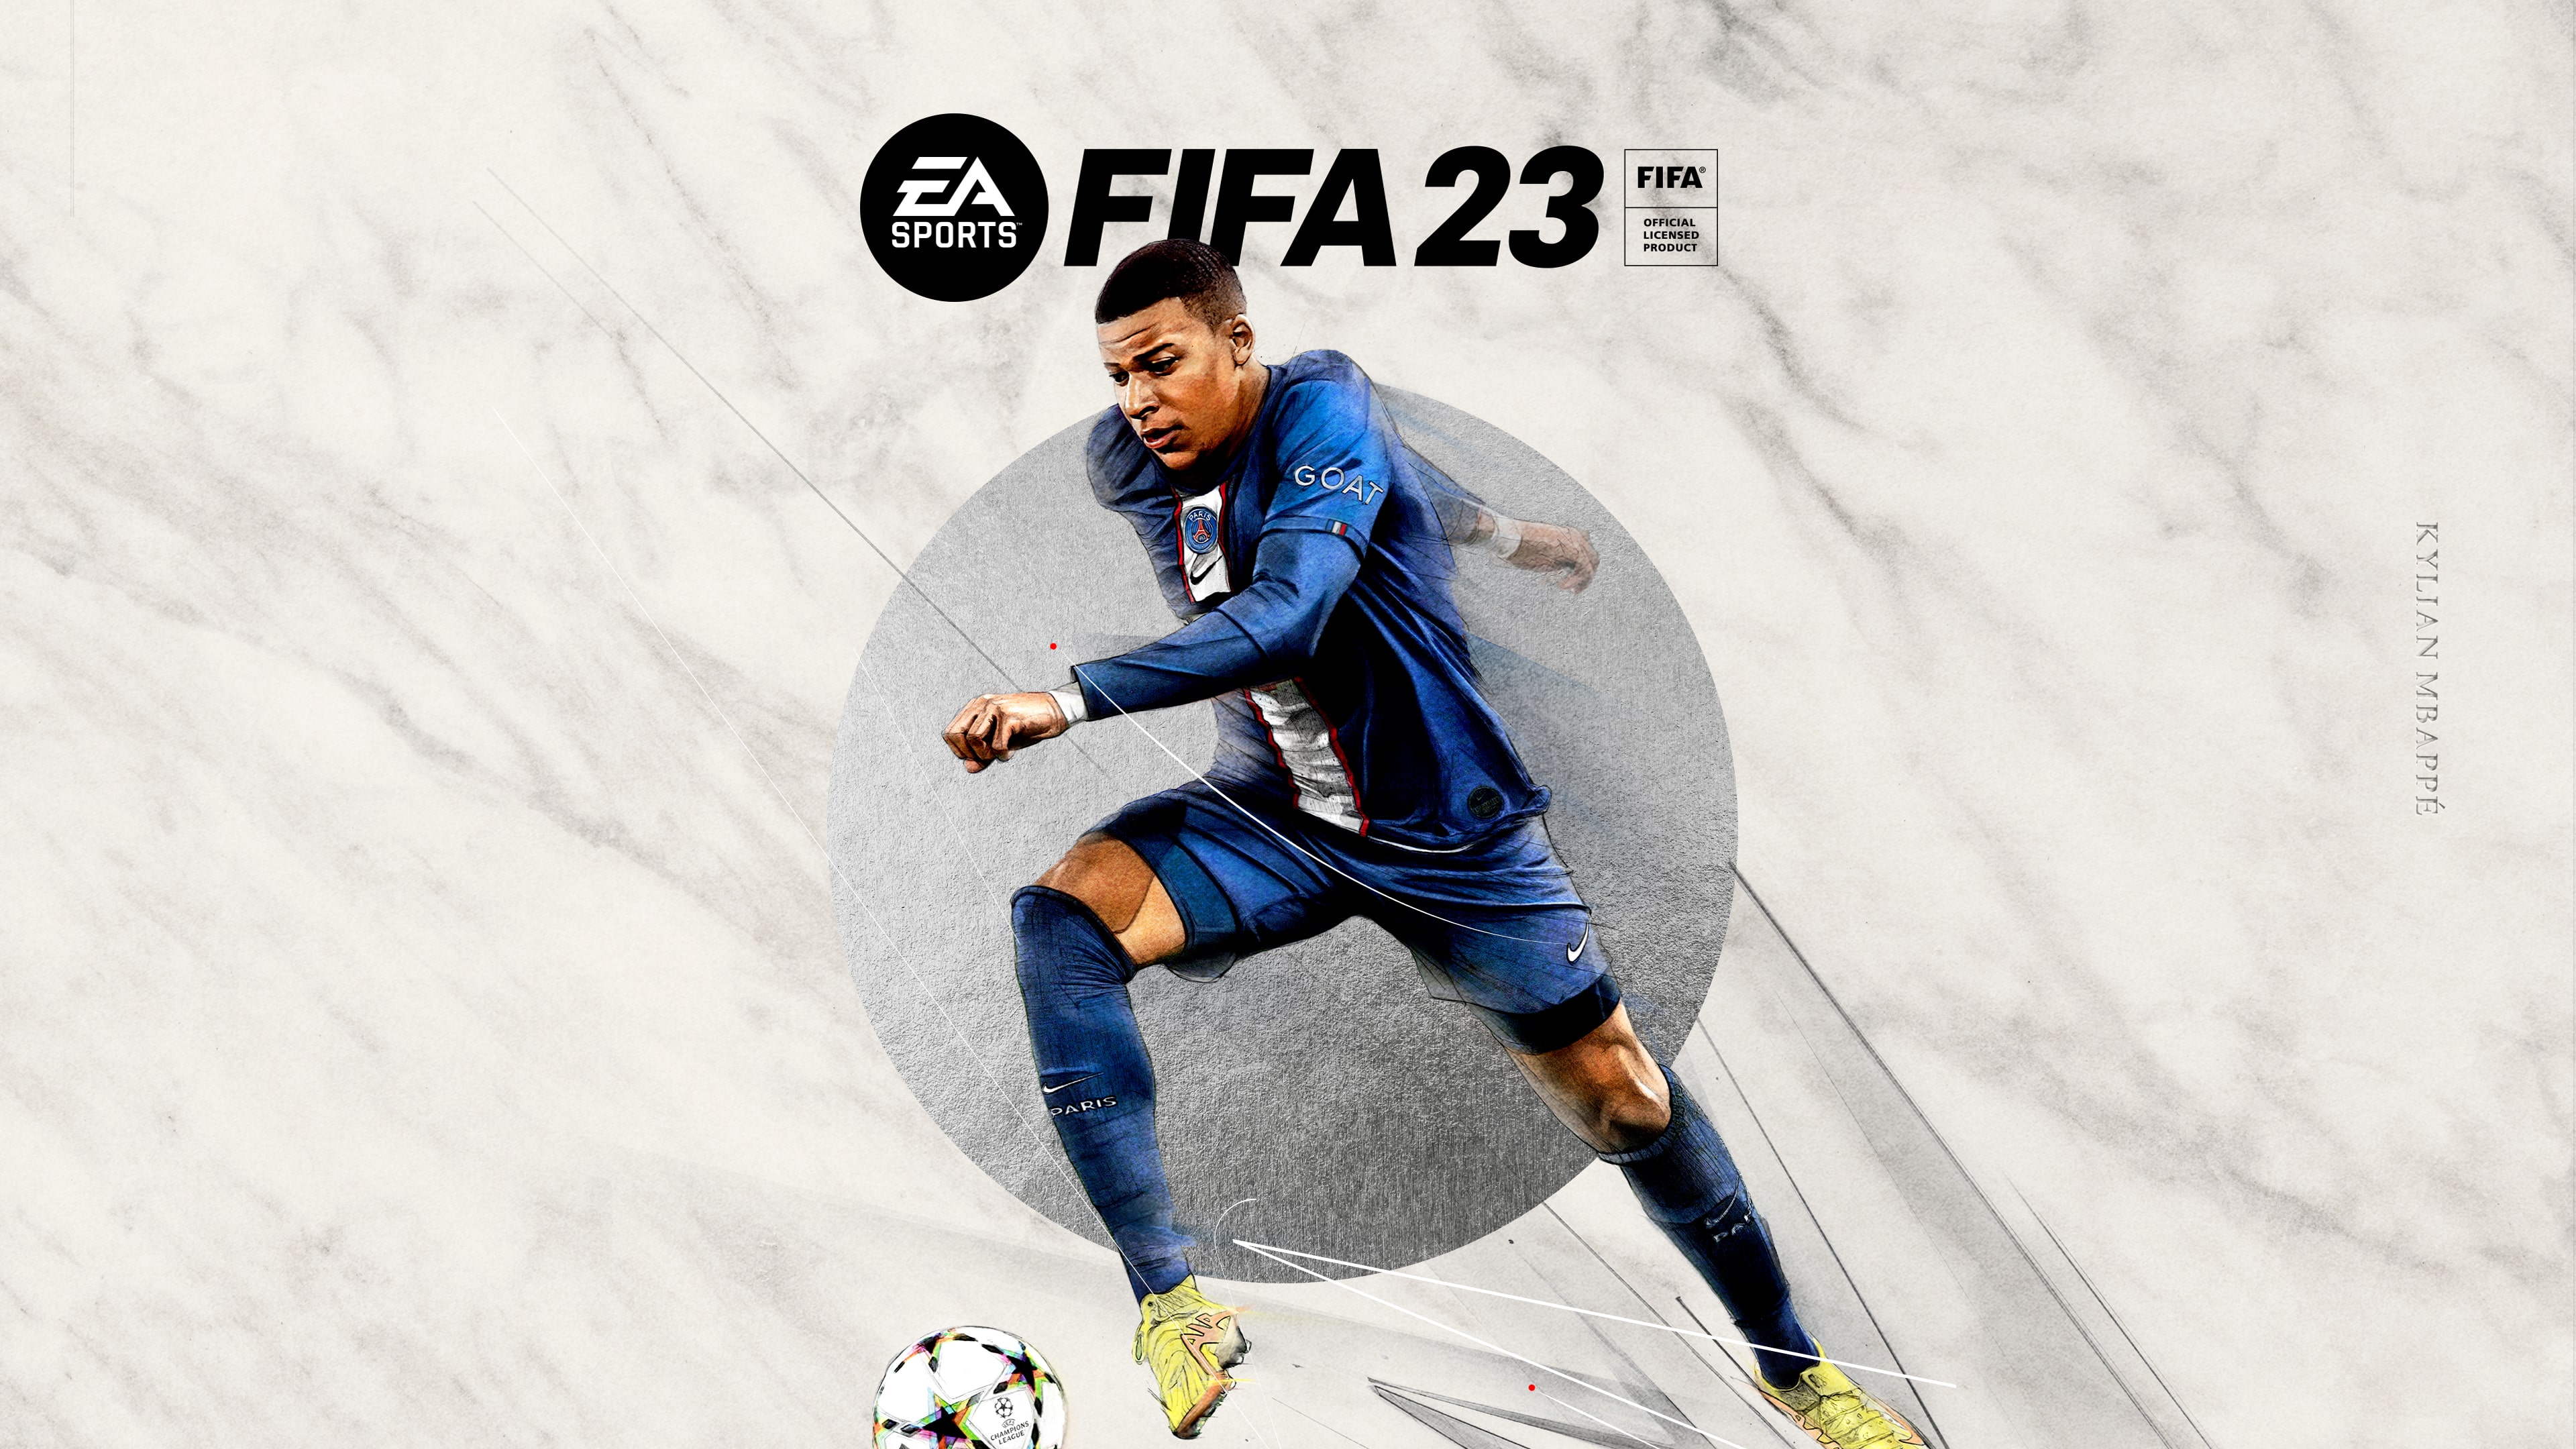 Ea Play Games 2023 All Computer Games Free Download 2023